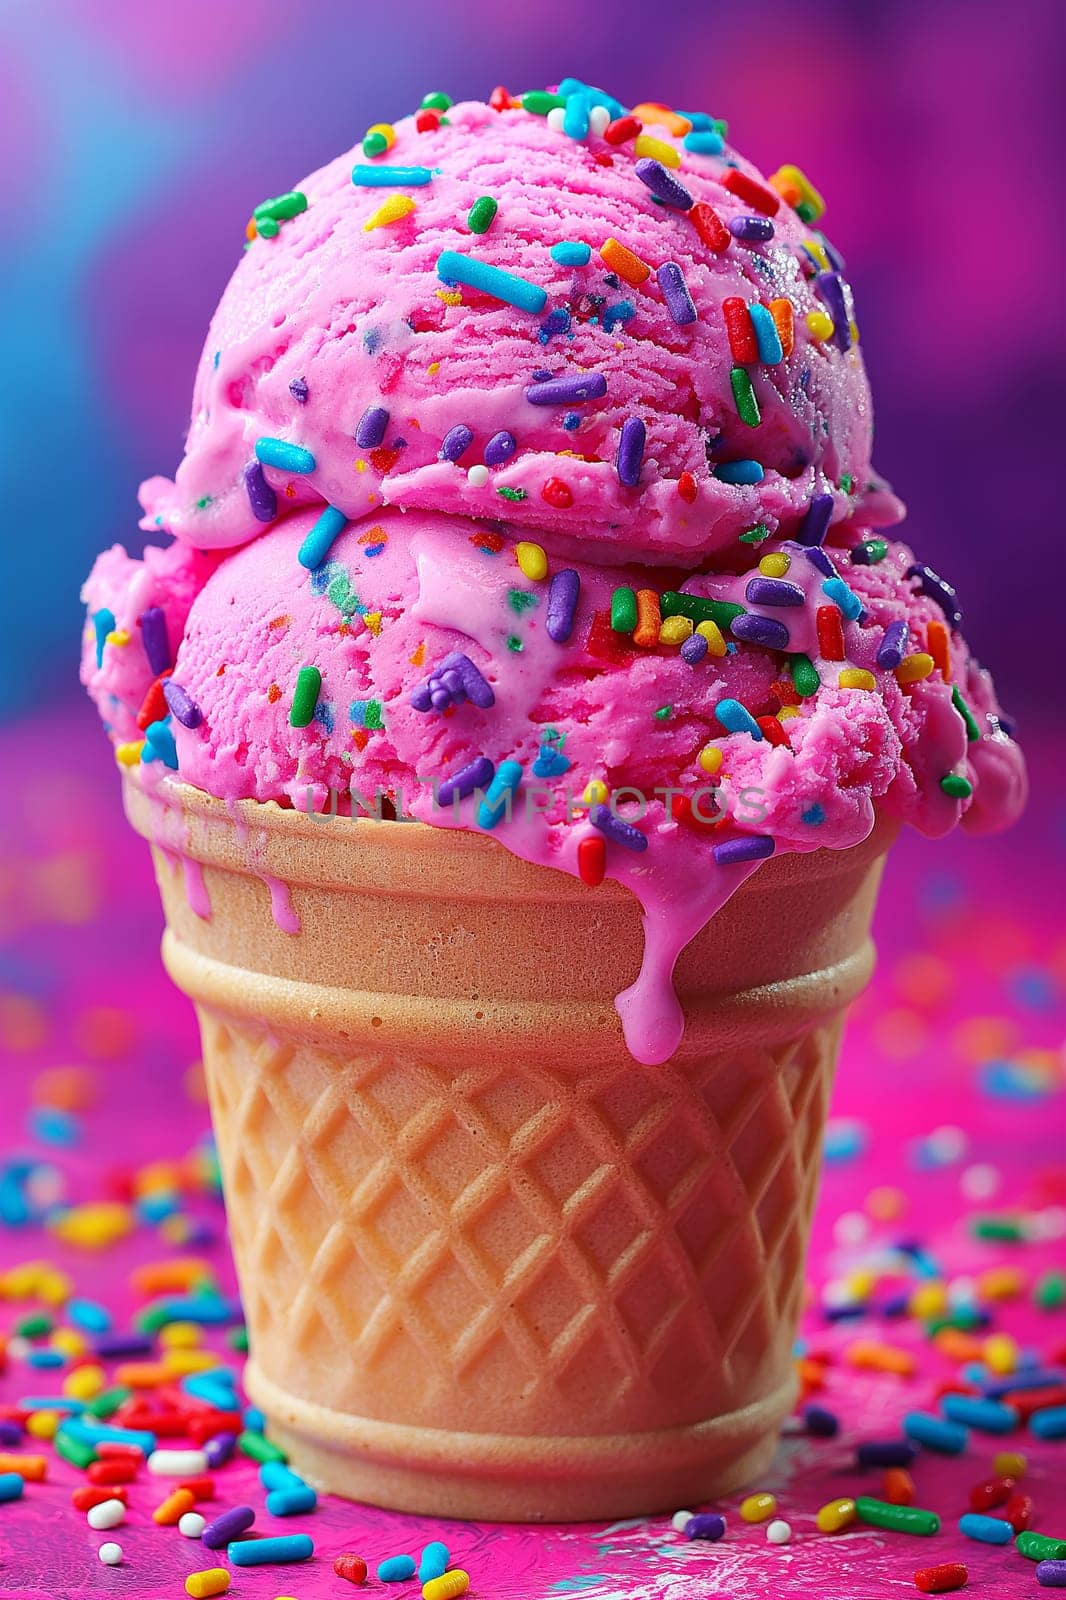 Scoops of multicolored ice cream in a cone with sprinkles and a blurred background. by Hype2art